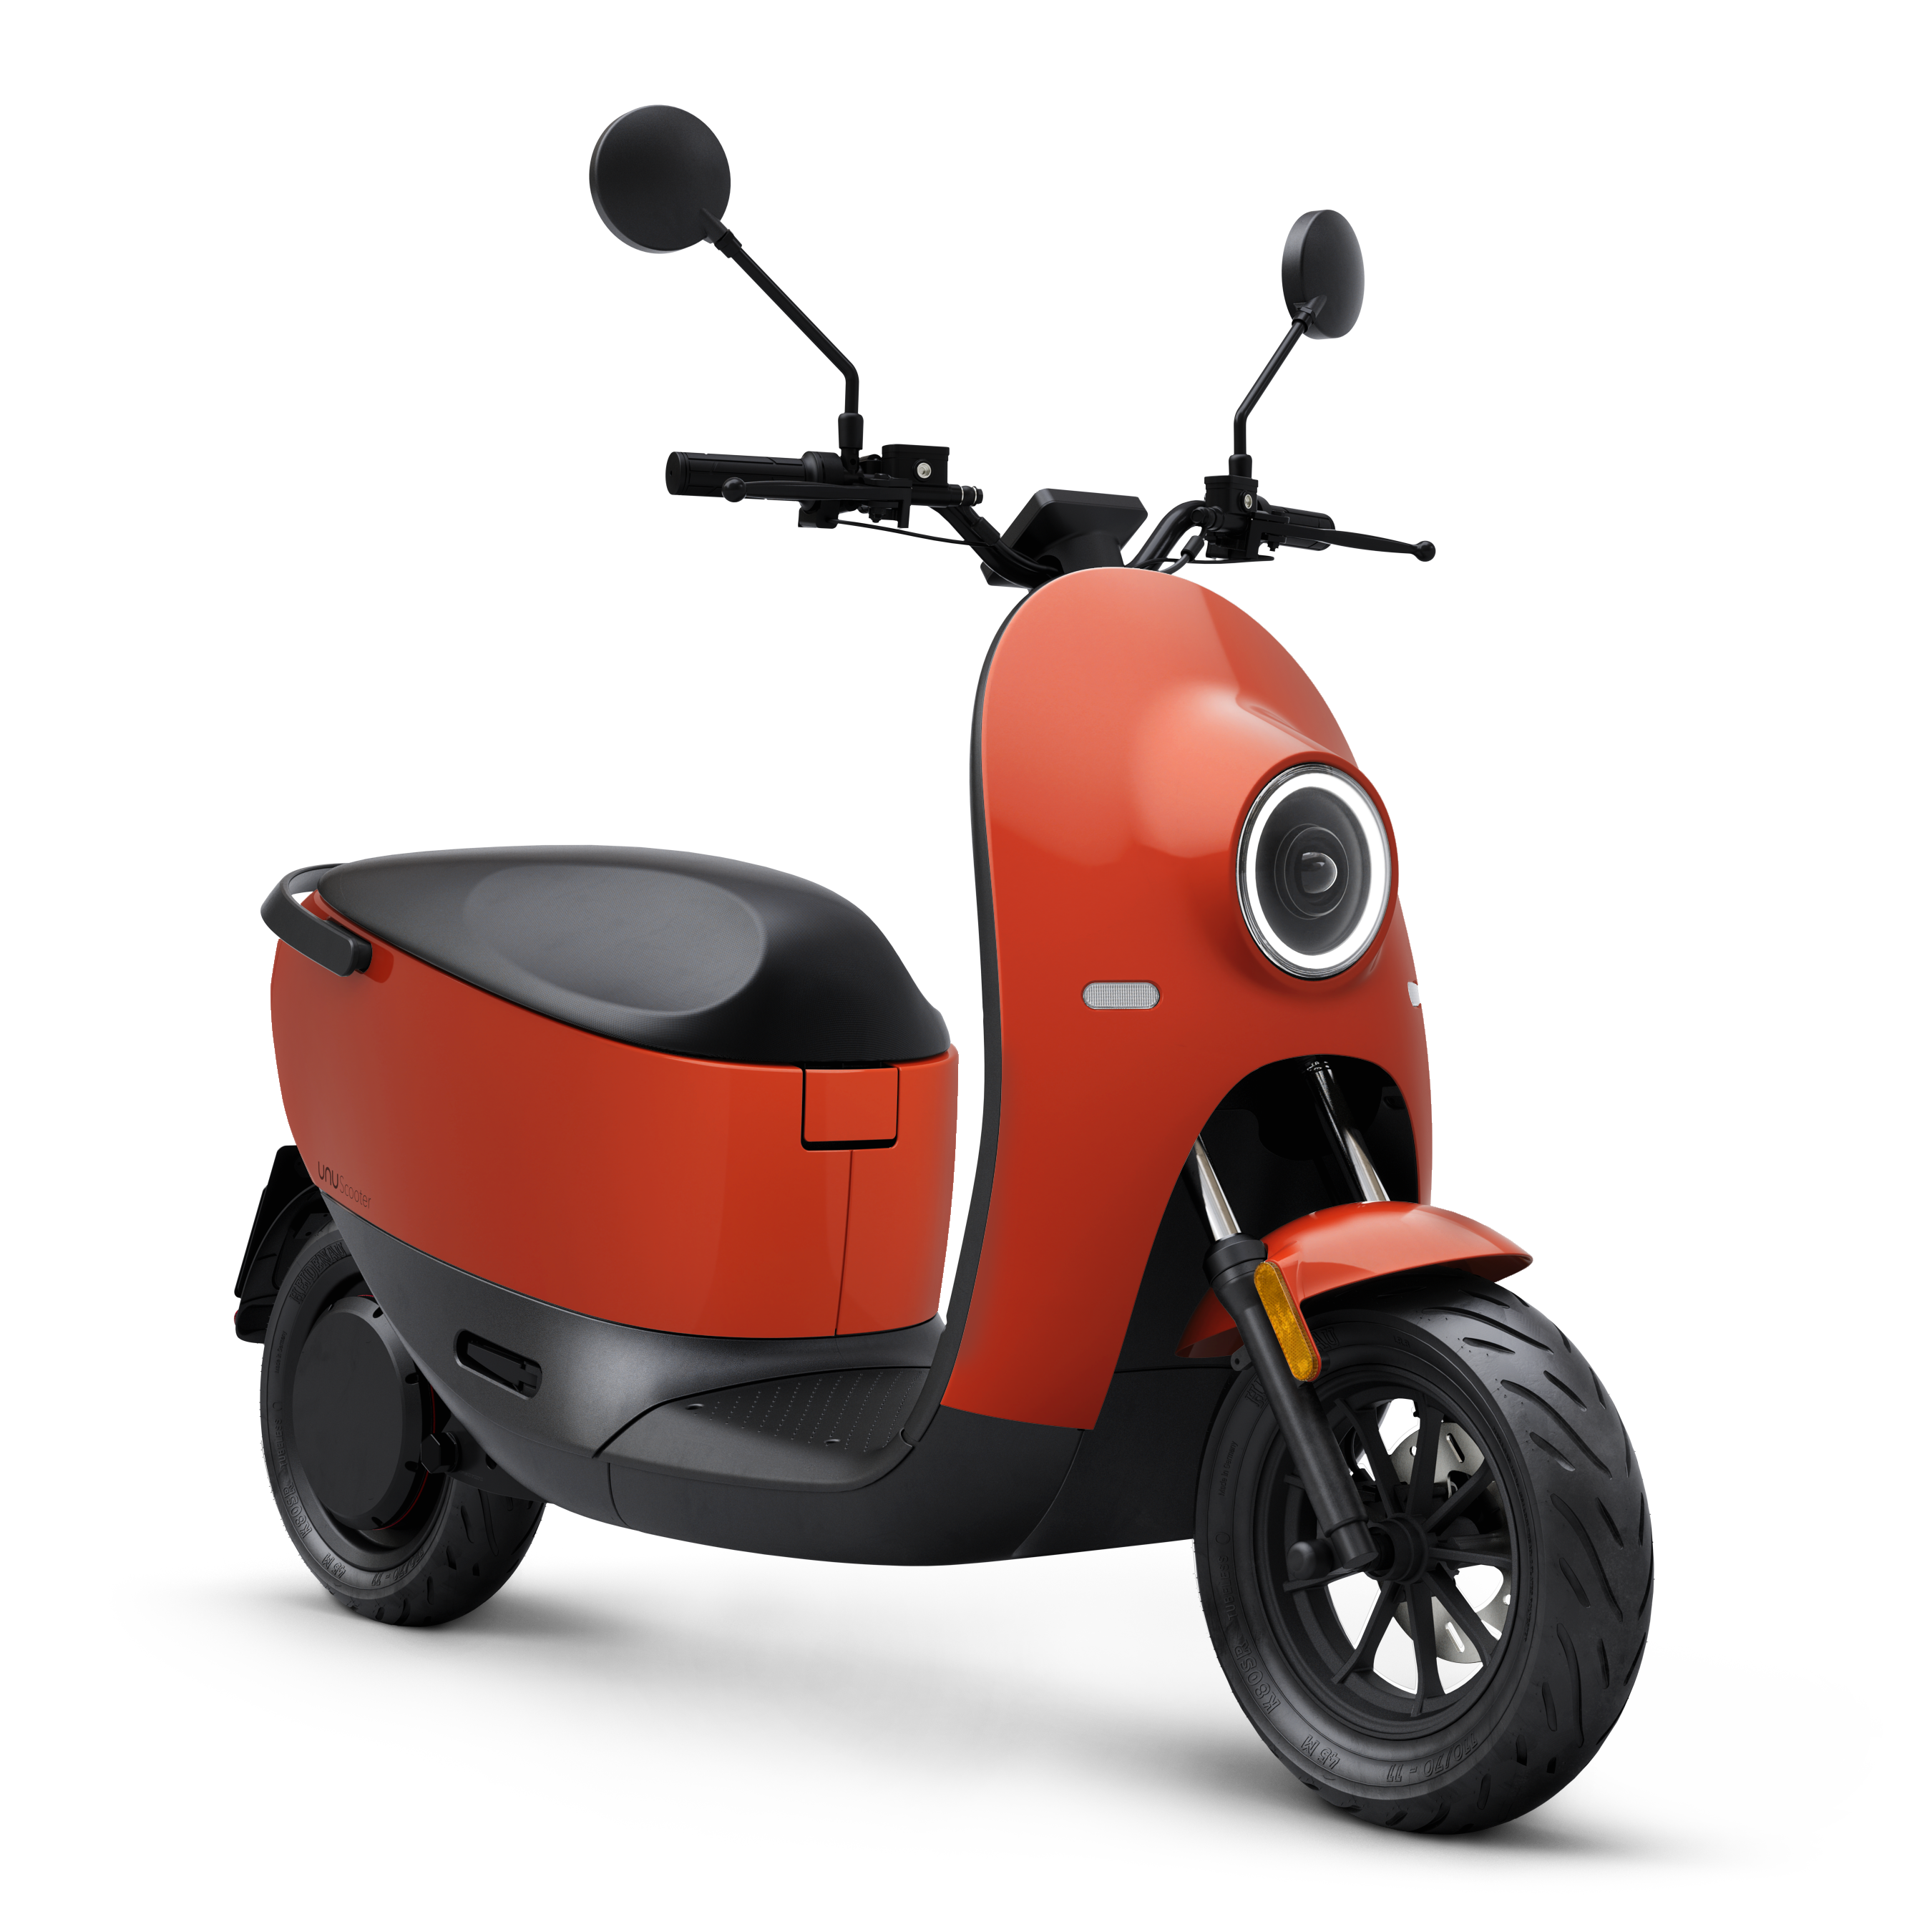 Perspective view on red glossy scooter